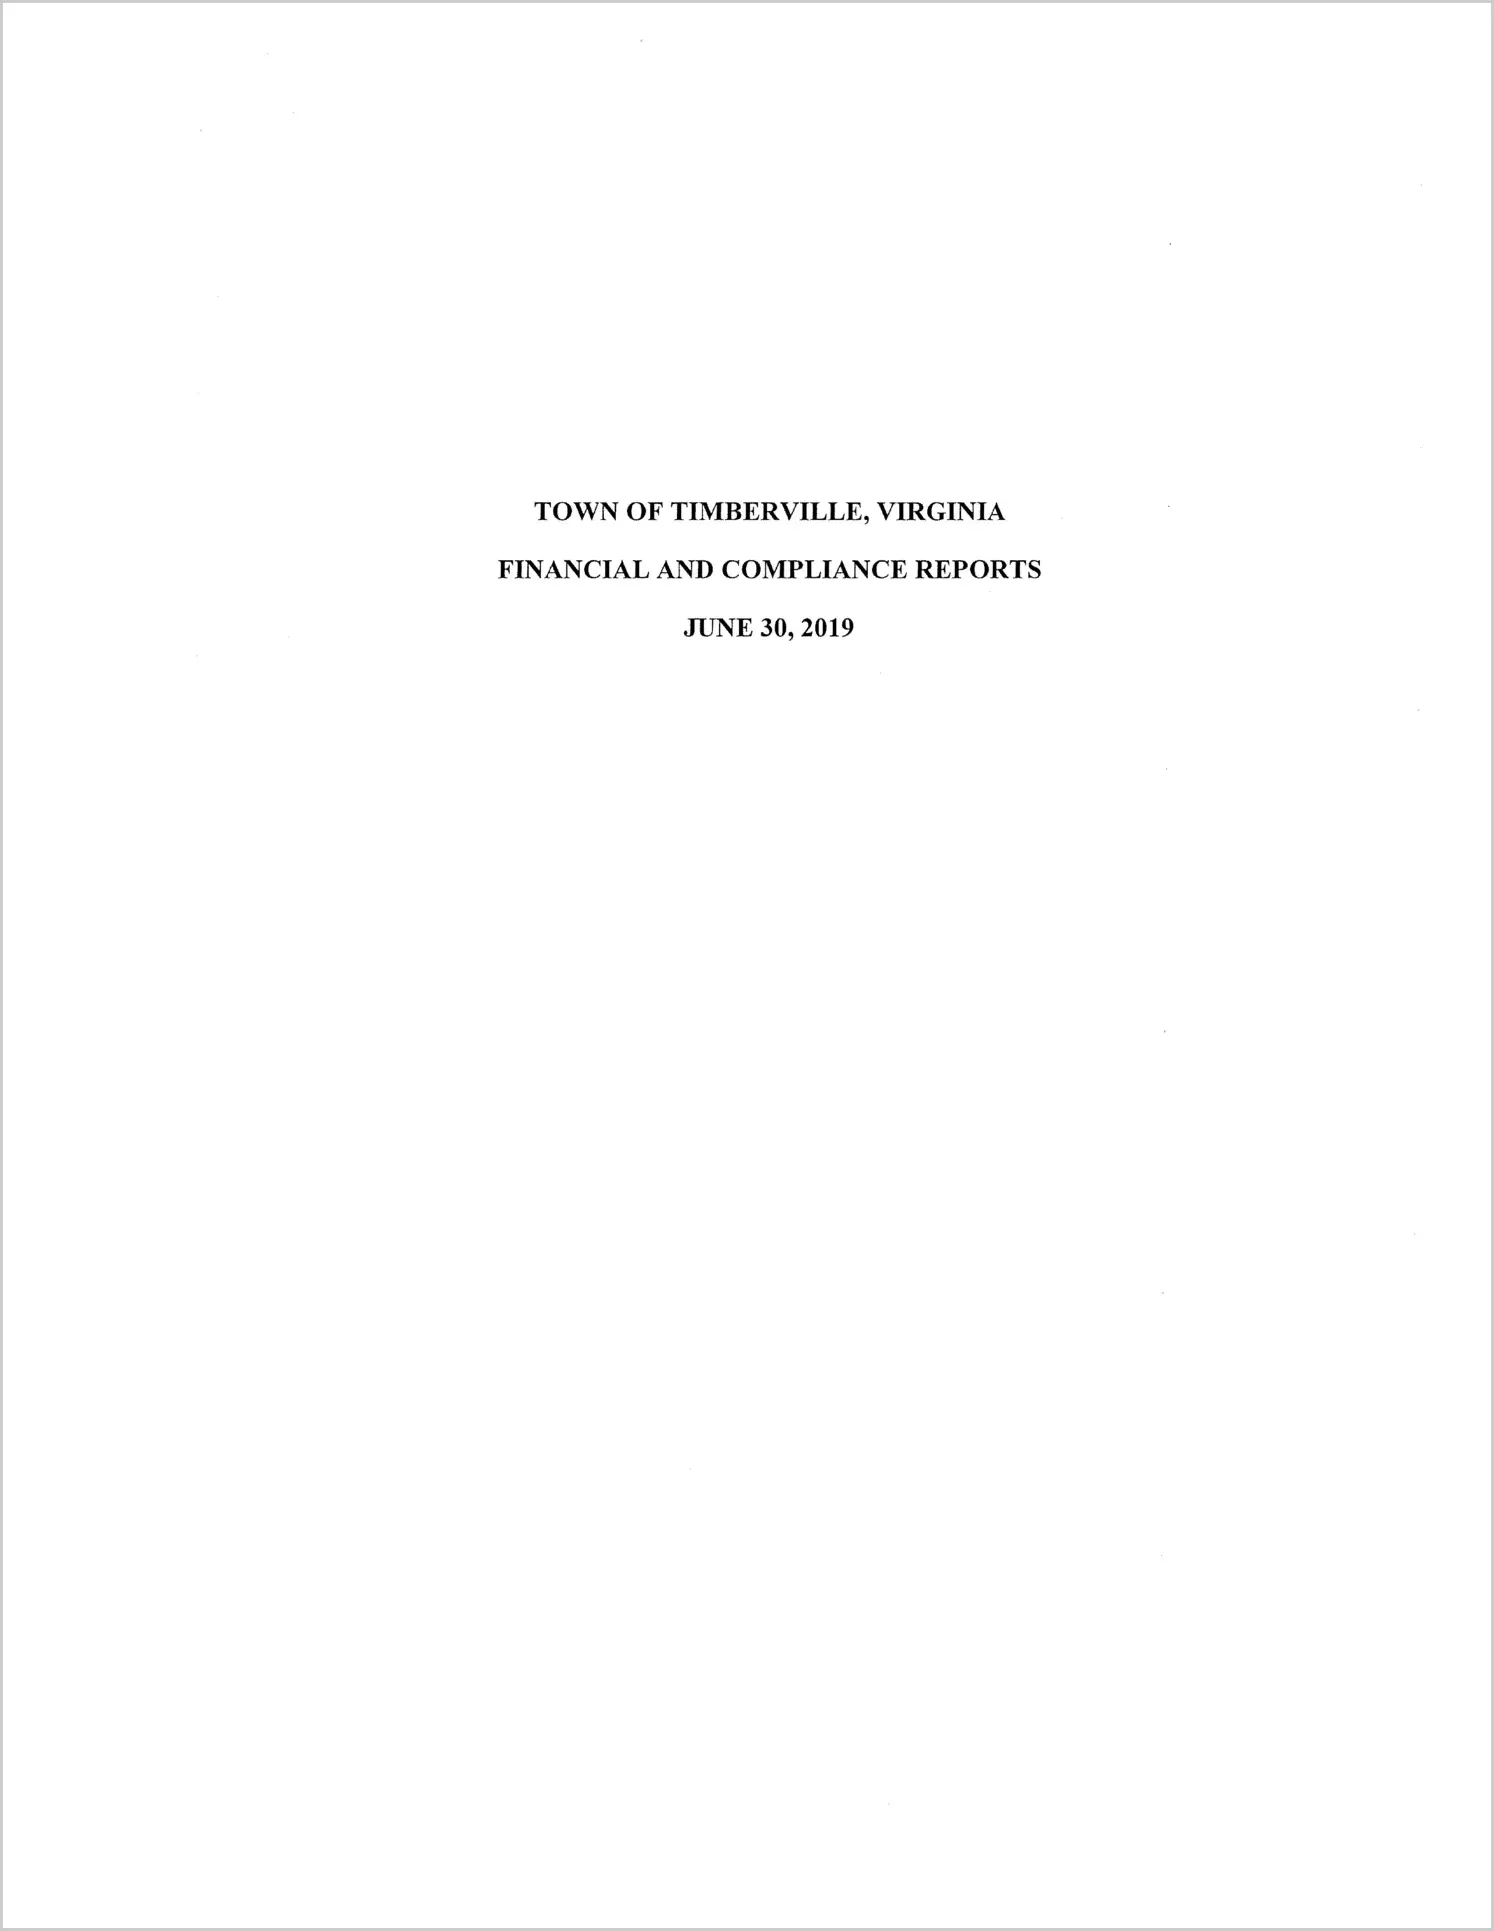 2019 Annual Financial Report for Town of Timberville